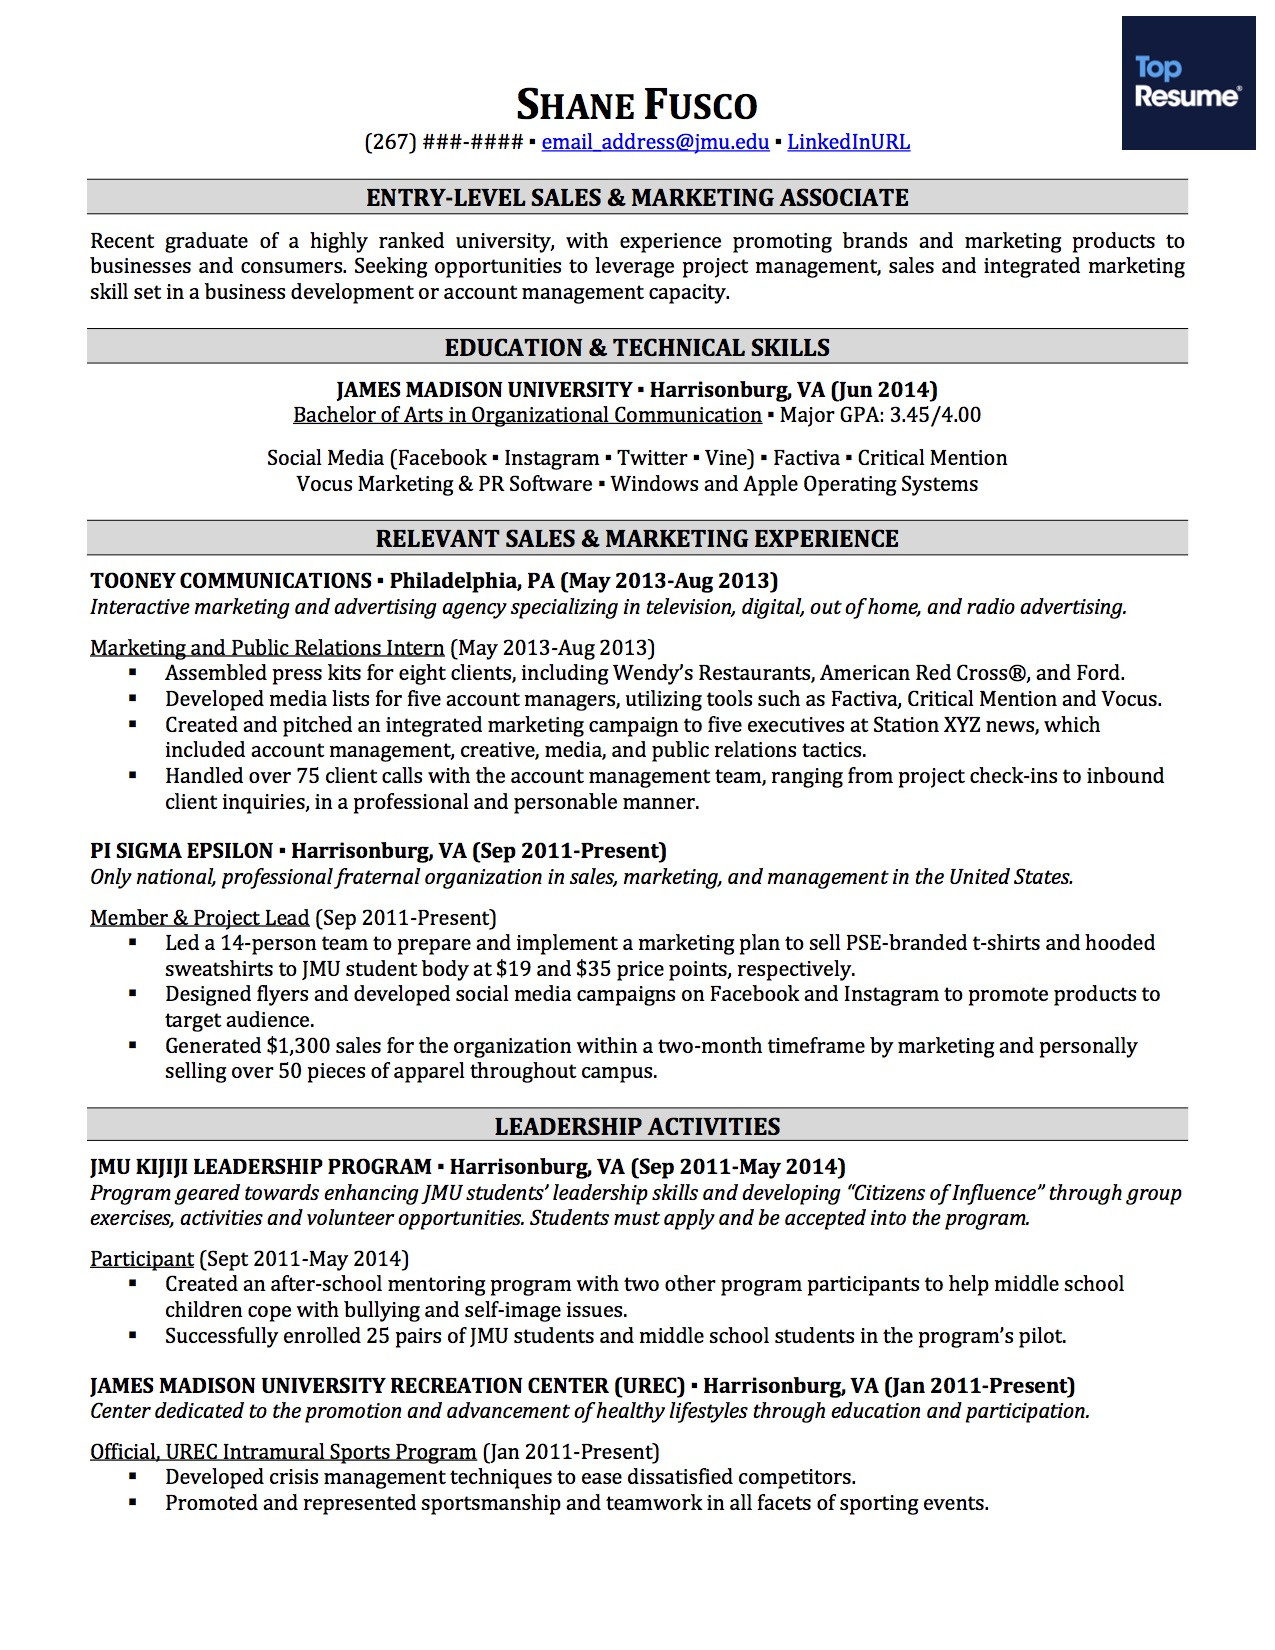 Resume Samples with No Work History How to Make A Great Resume with No Experience topresume